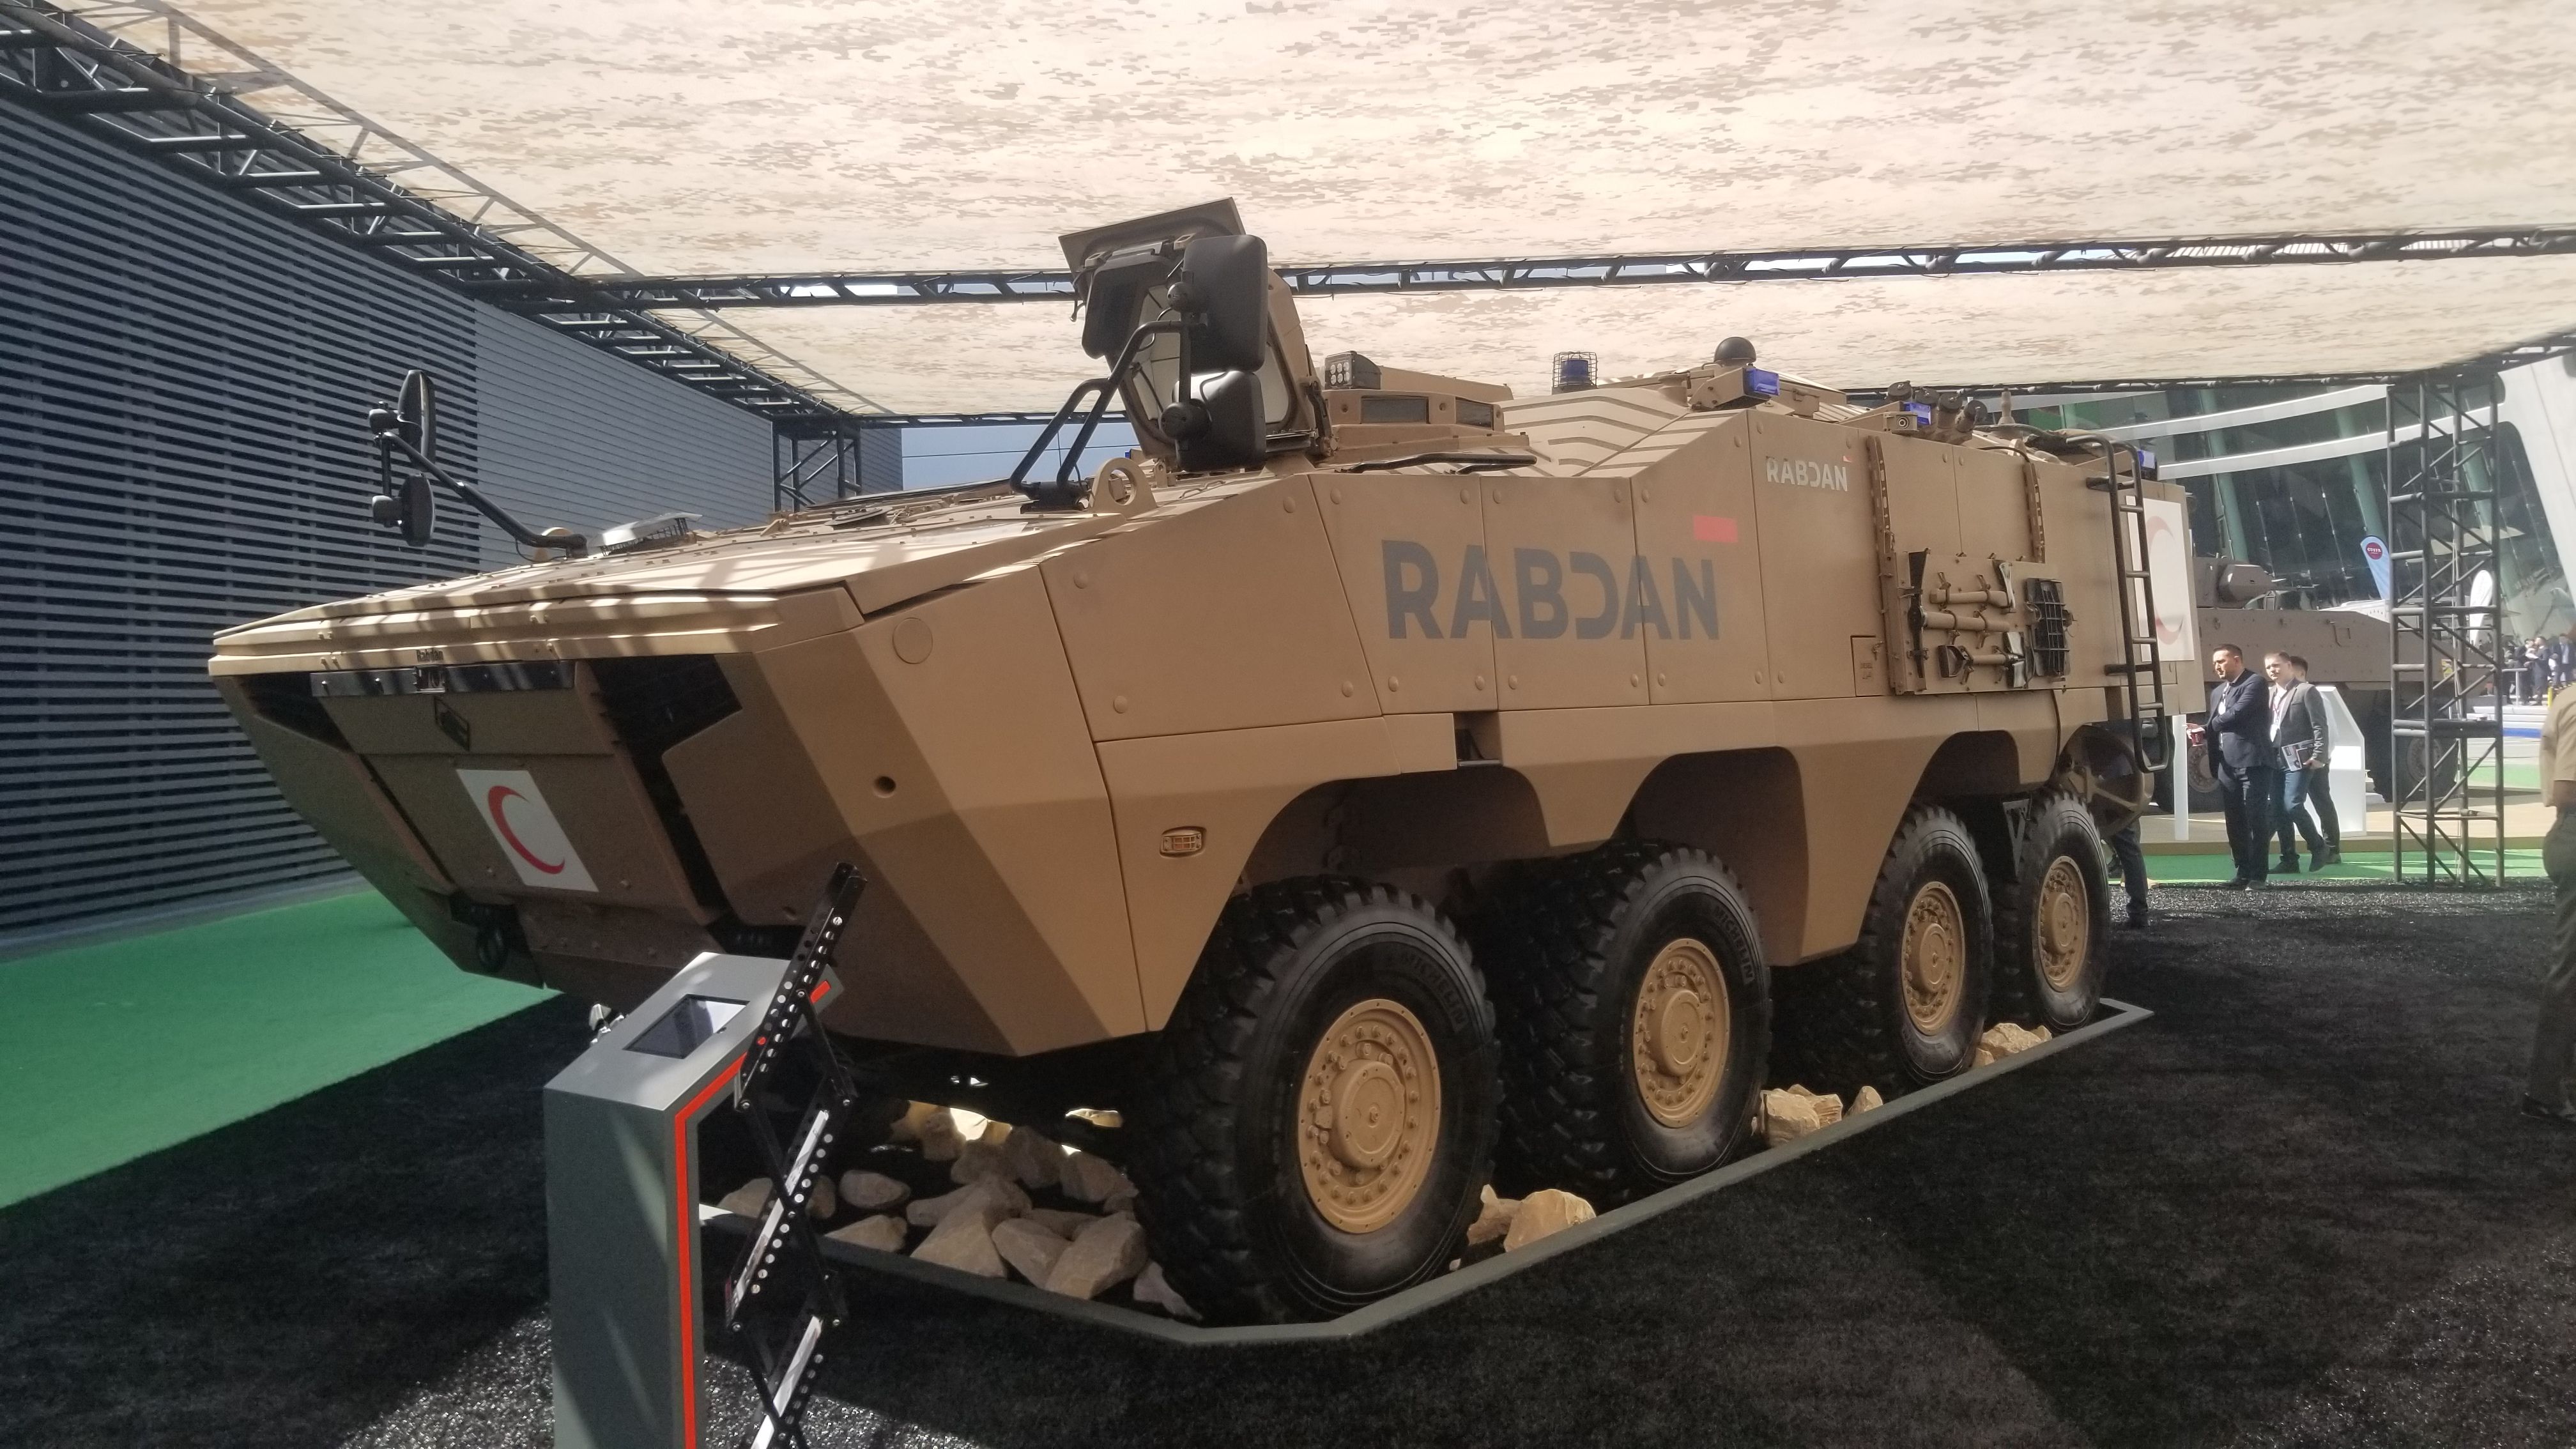 Otokar Has New Targets in the UAE and The Region